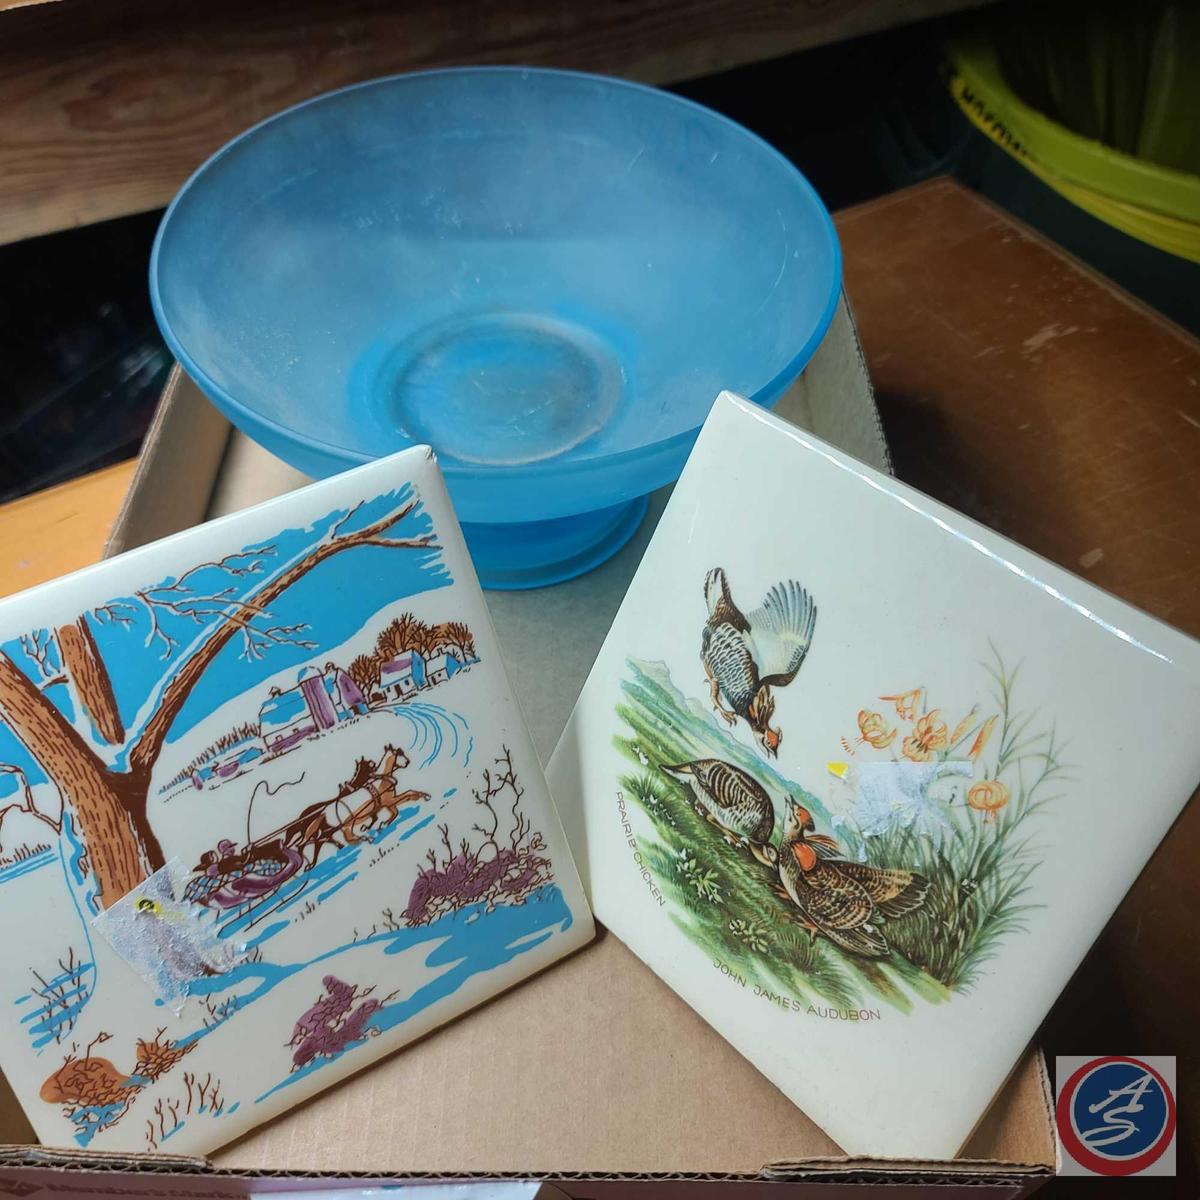 Audubon prairie chickens tile, Horse drawn sleigh tile, frosted glass blue 2 pc footed bowl